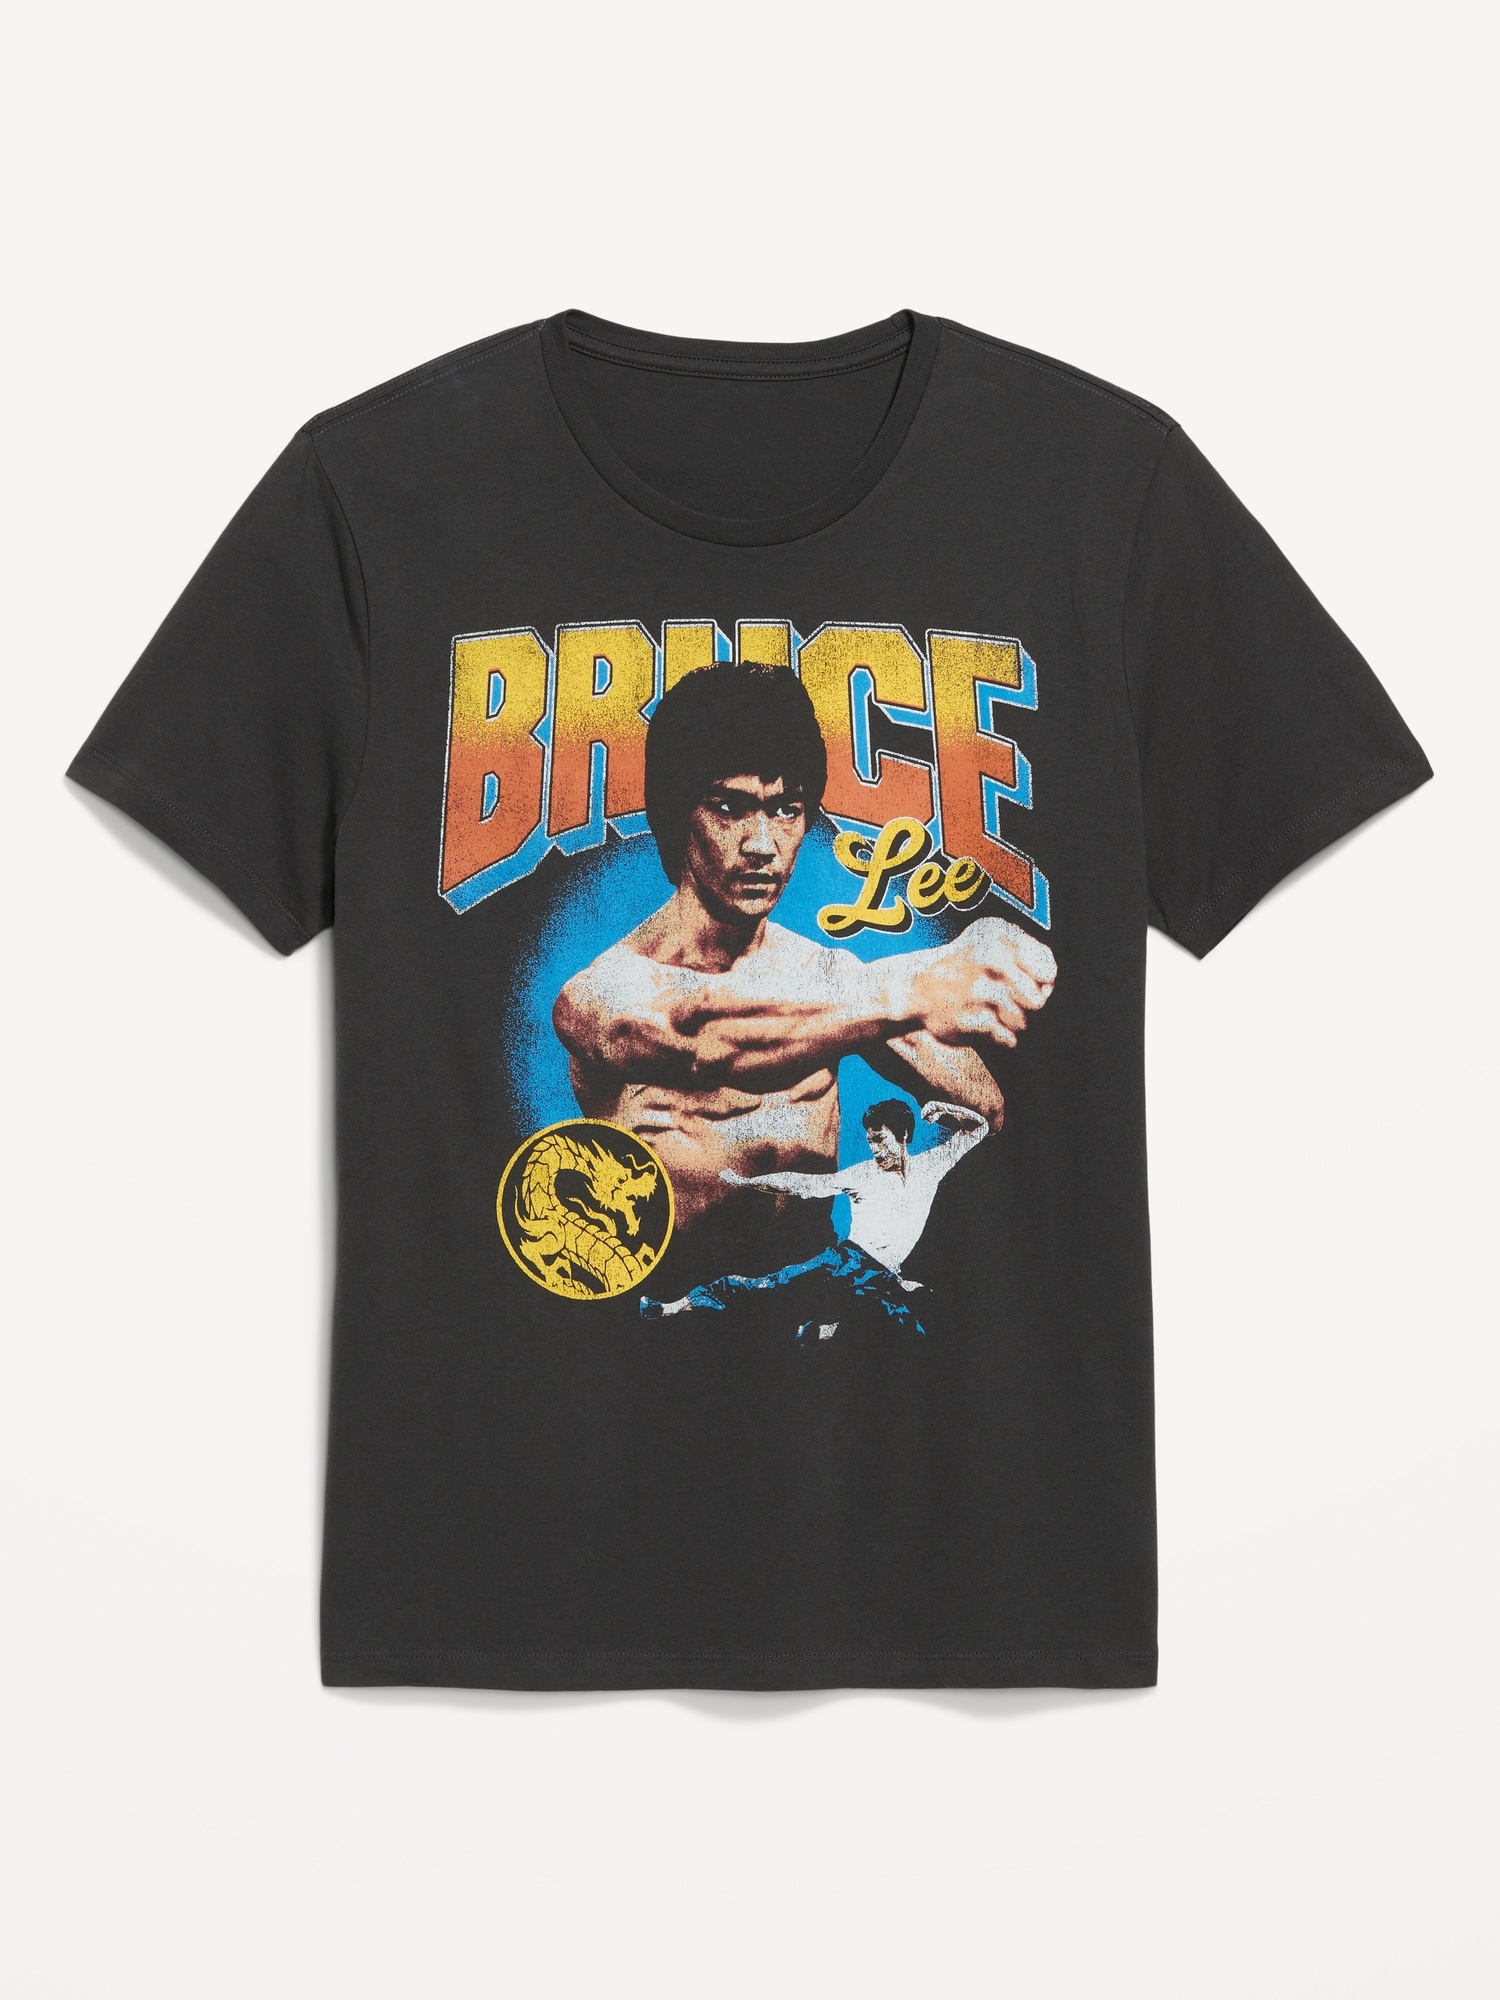 Bruce Lee Gender-Neutral T-Shirt for Adults